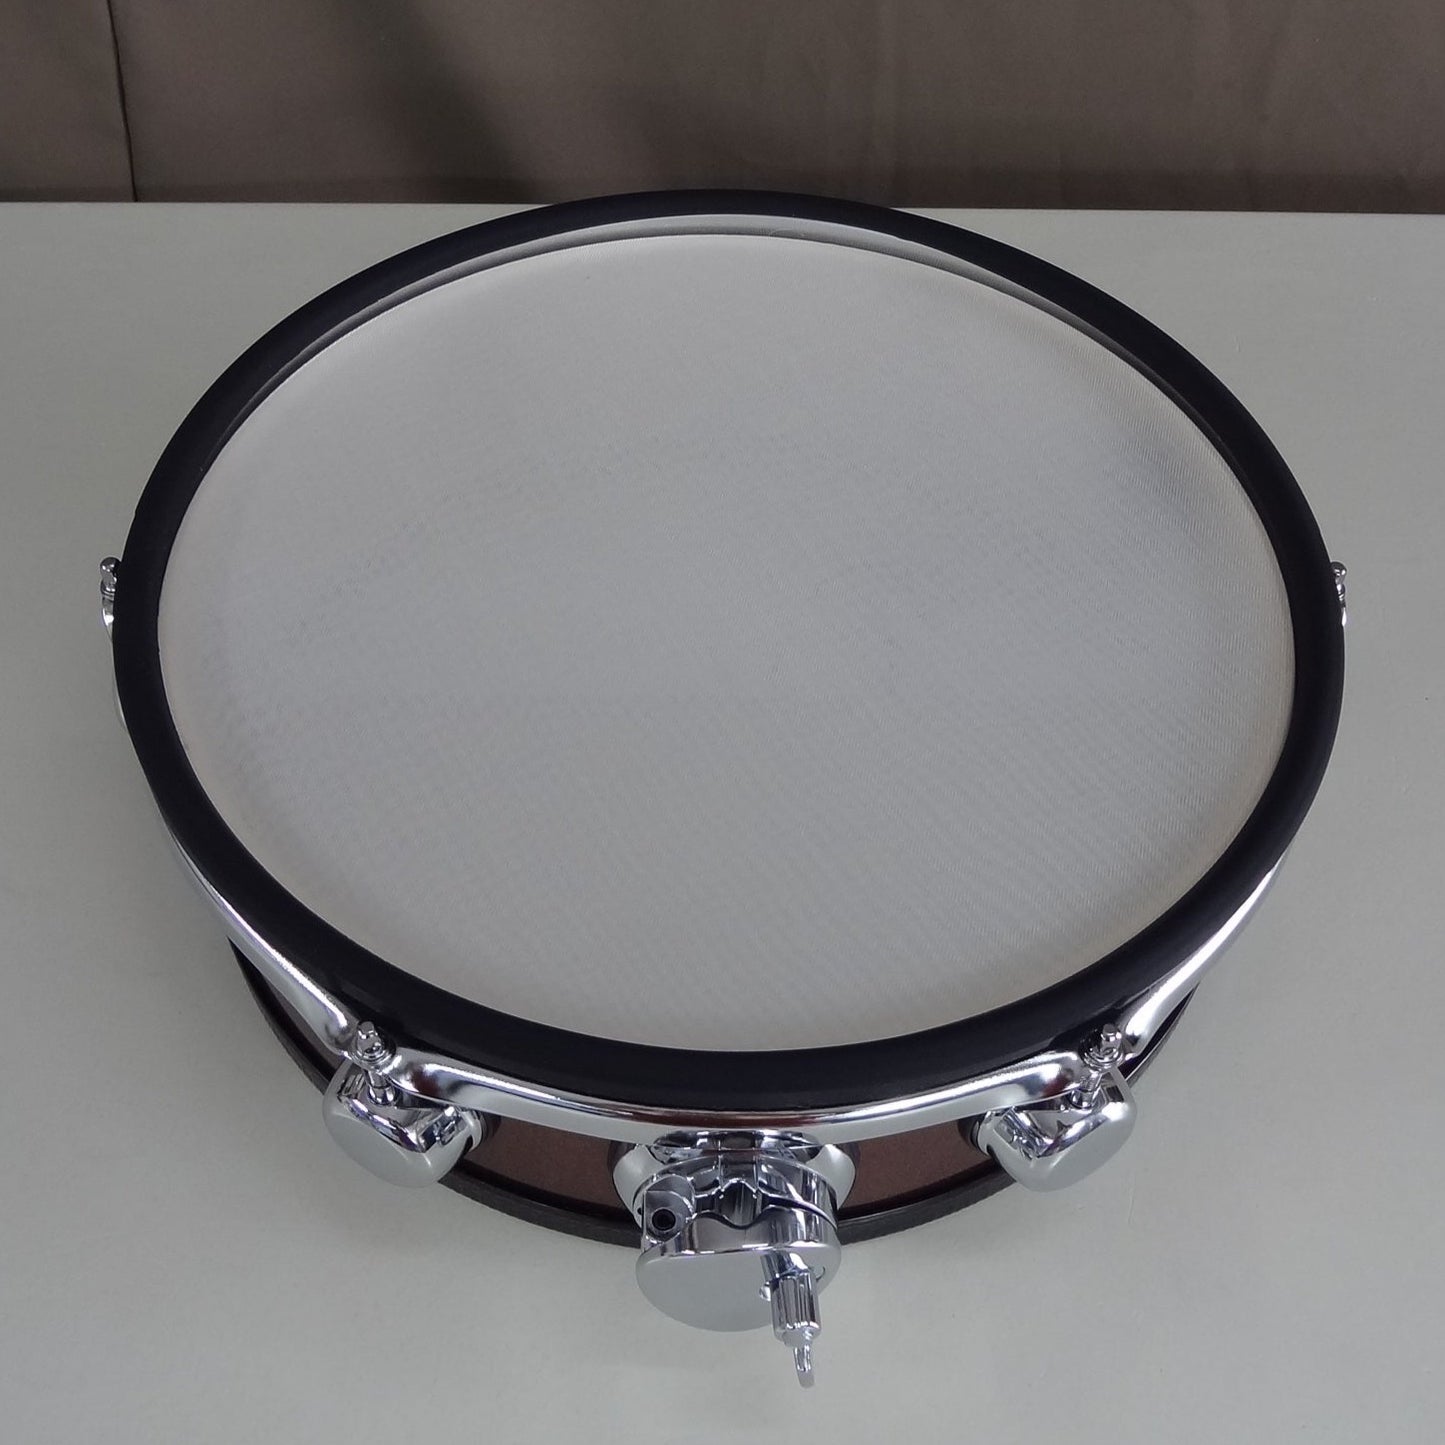 New 13 Inch Custom Electronic Snare Drum - Red Sparkle